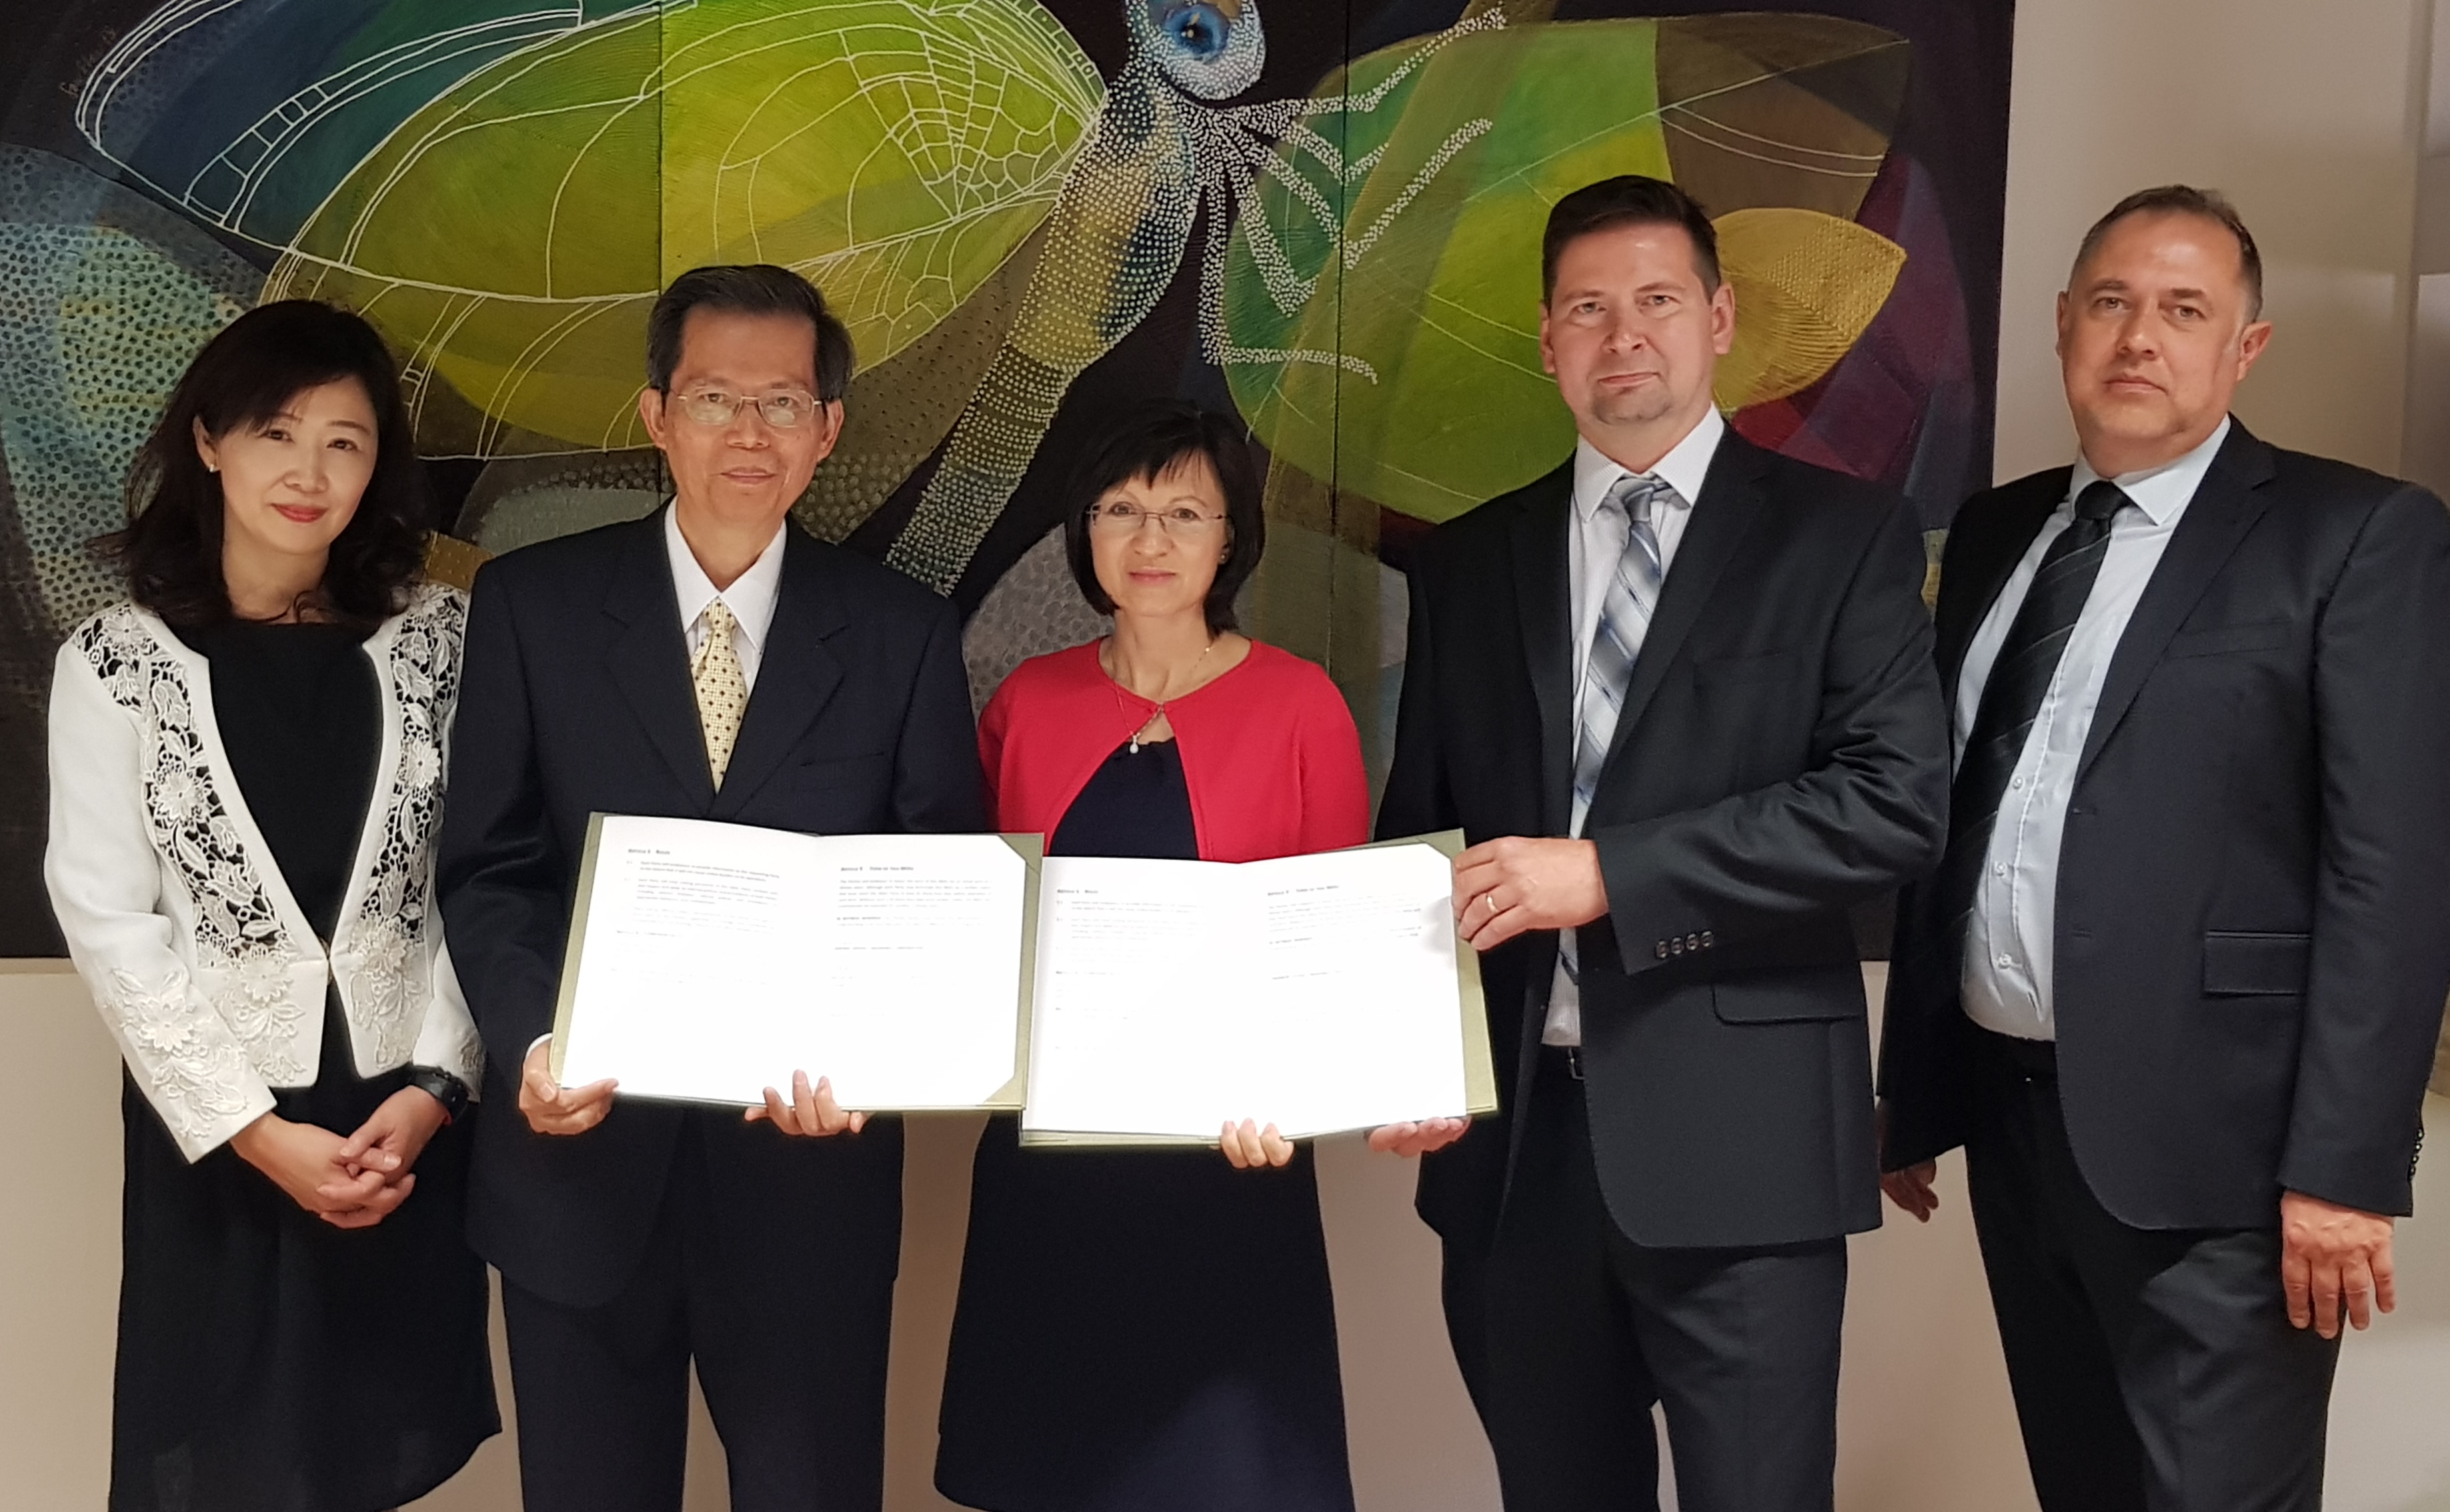 Group photo of CDIC Executive Vice President Mr. William Su (left 2), Director of International Relations and Research Department, Yvonne Fan (left 1), and FMGS Chairperson of the Managing Board and Managing Director Mrs. Renata Kadlecova (centre), Management Board Member and Chief Legal Manager Mr. Tomas Hejduk, (right 2), Management Board Member Mr. Roman Kahanek (right 1)